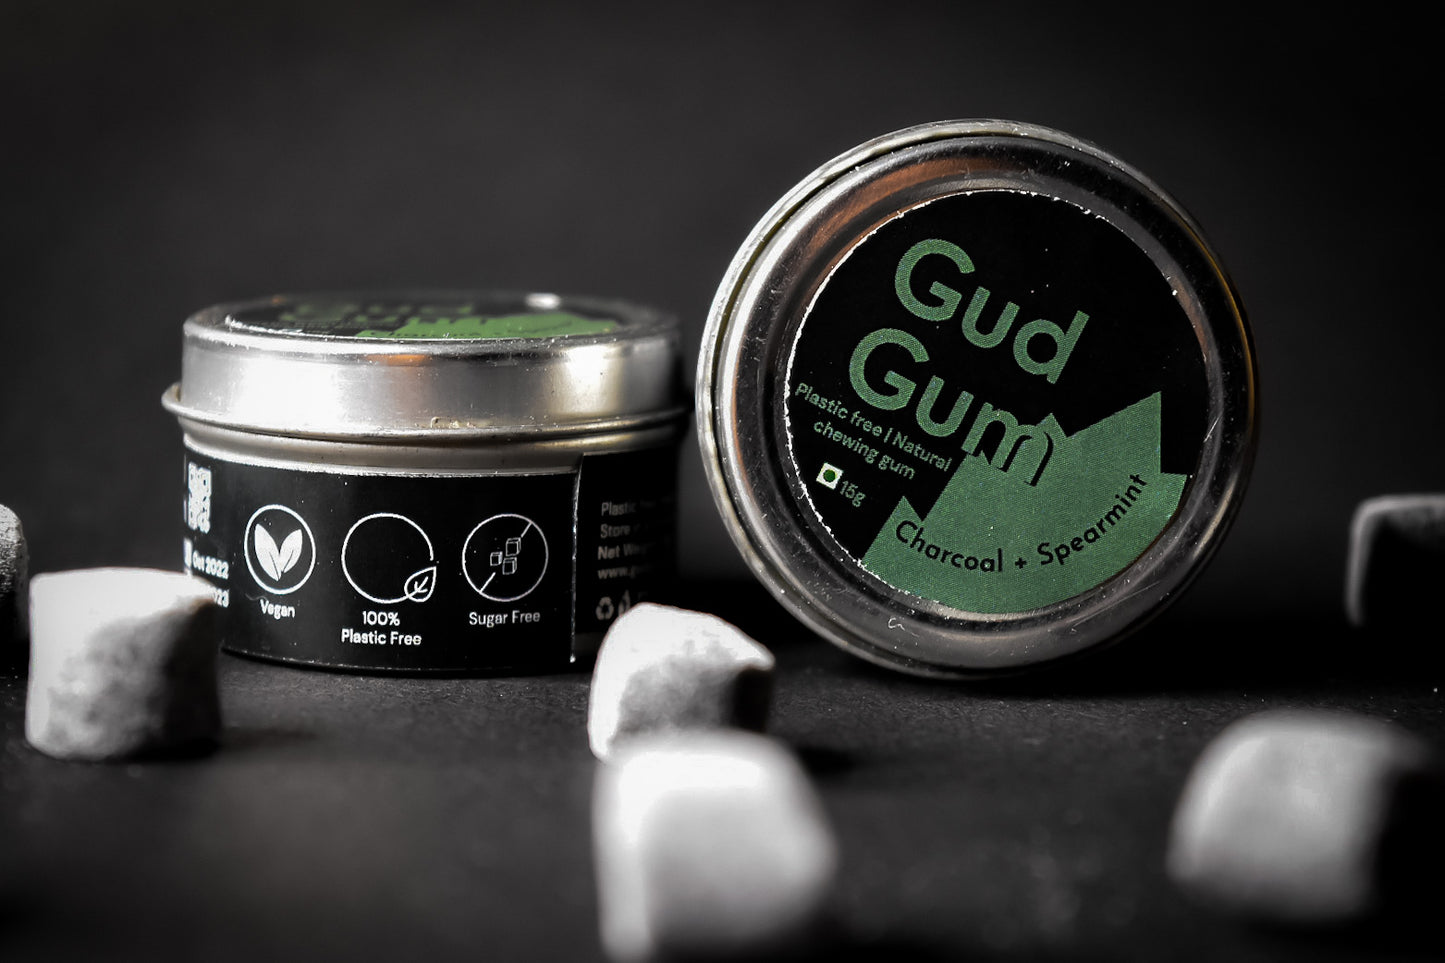 Charcoal-Mint Gum - Plastic Free, Sugar Free, Natural, Biodegradable, Vegan Chewing Gums | No added colours and flavours- (10 pieces per pack)- 15g - Tin Packaging